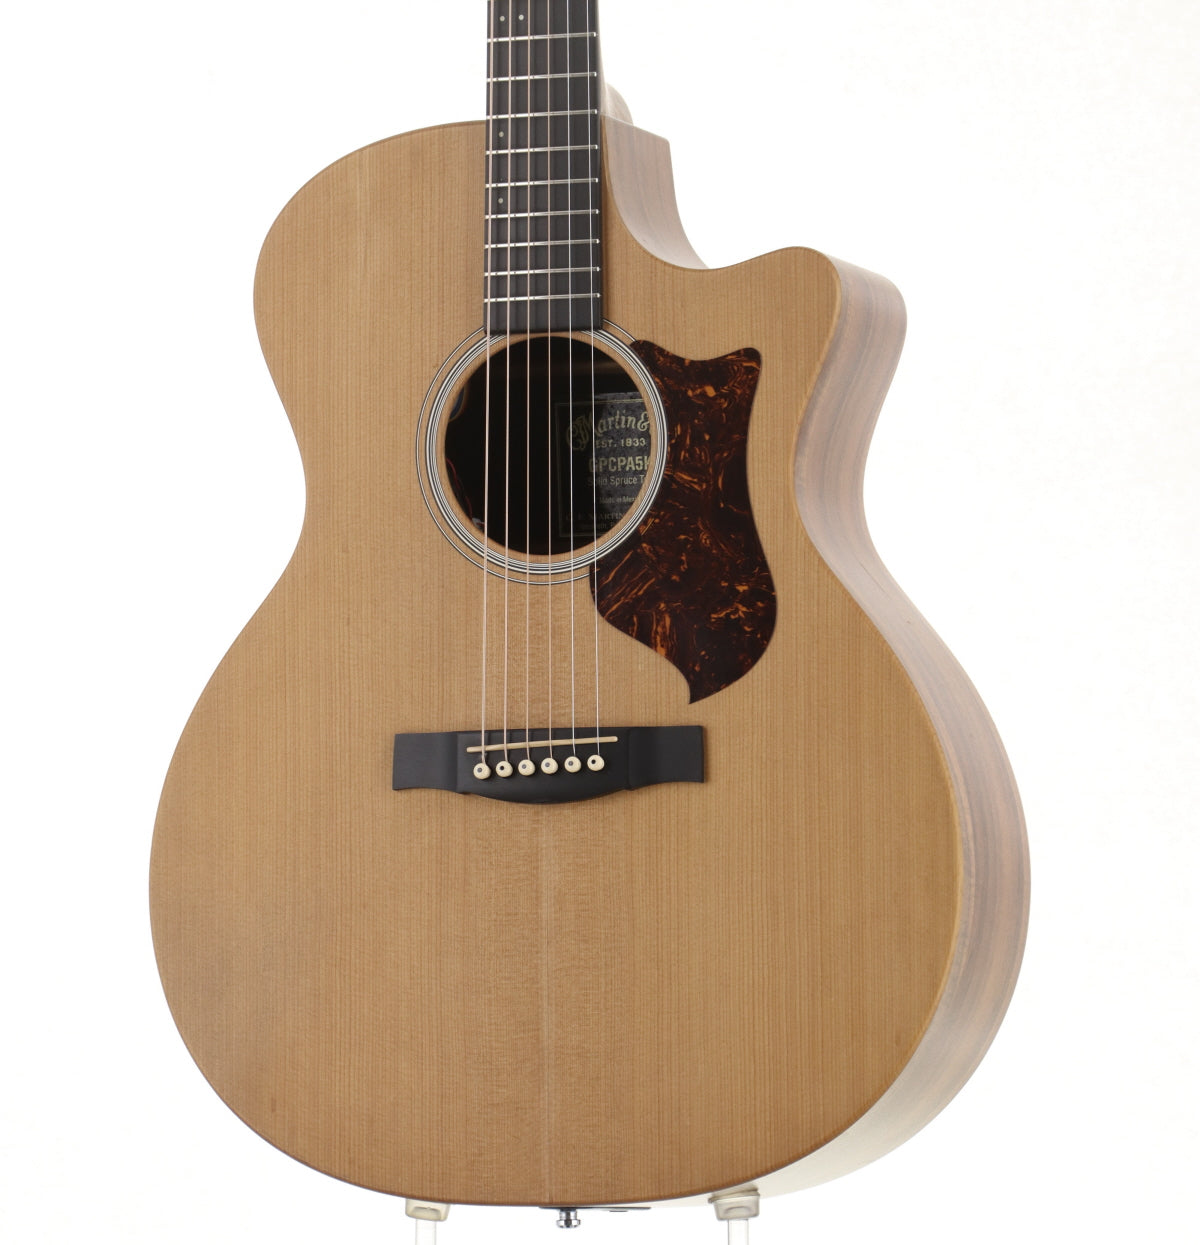 [SN 1719253] USED Martin / Performing Artist Series GPCPA5K made in 2013 [09]